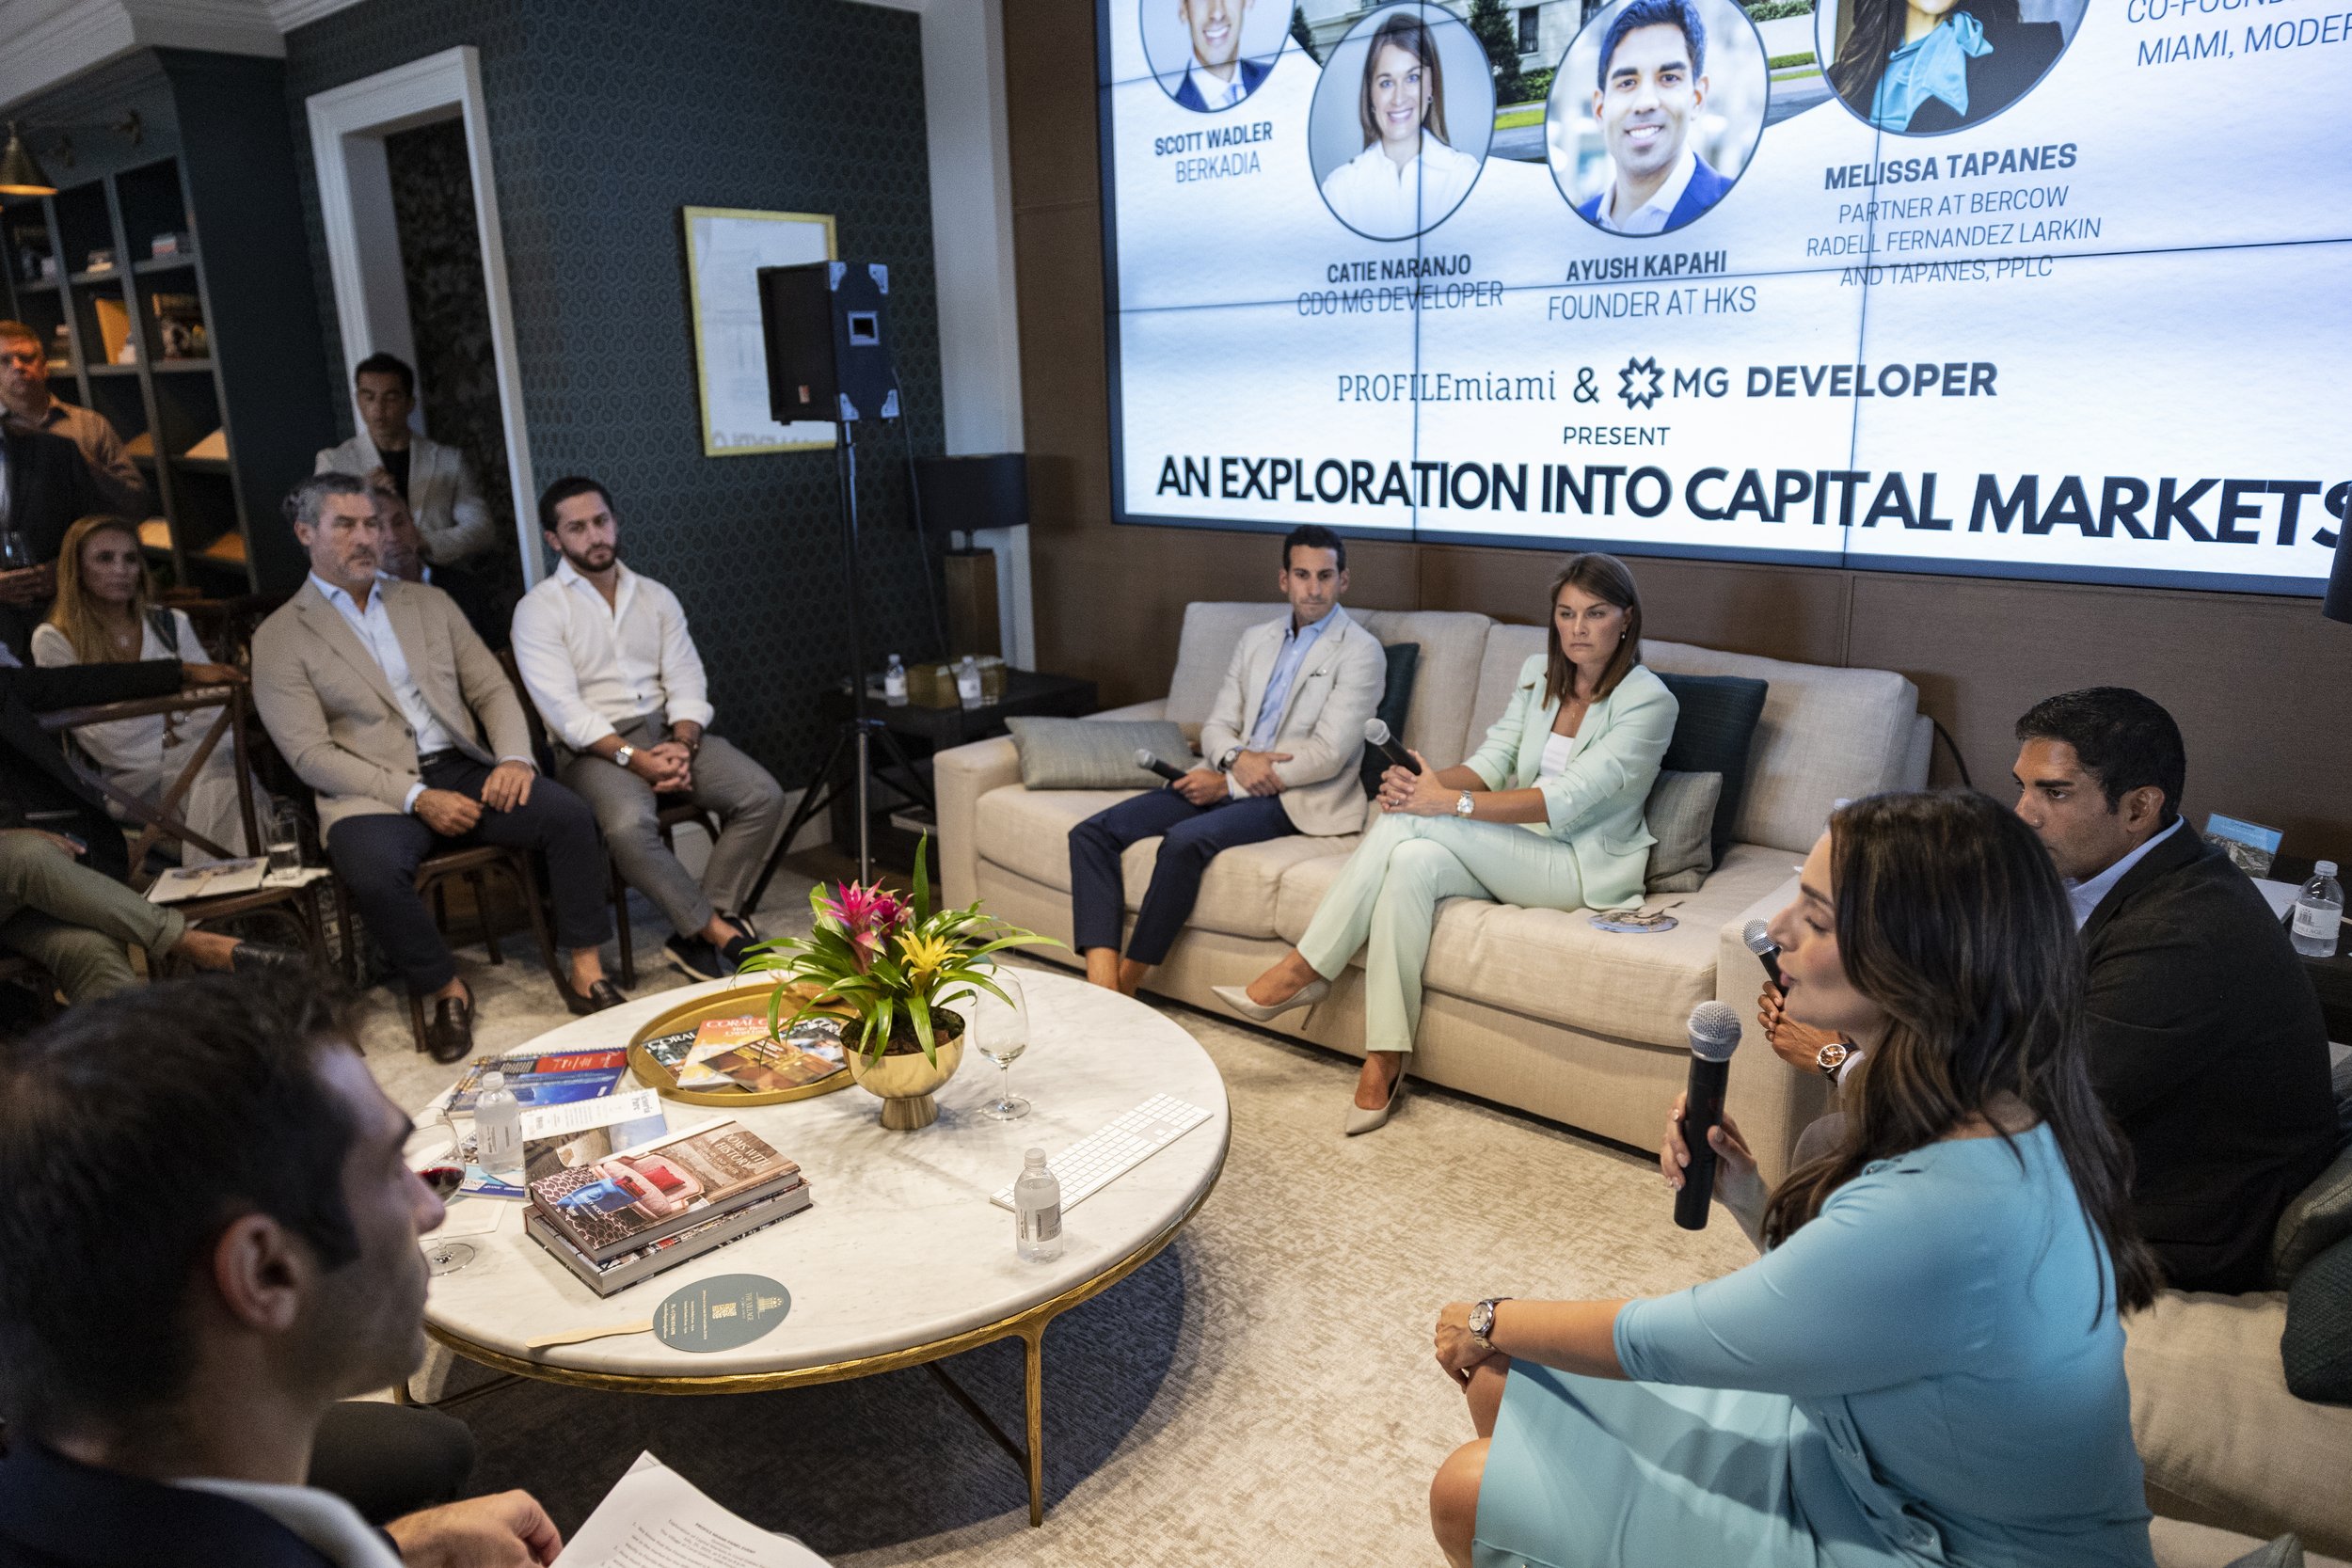 Inside 'An Exploration Into Capital Markets Coral Gables' Presented By PROFILEmiami & MG Developer171.JPG